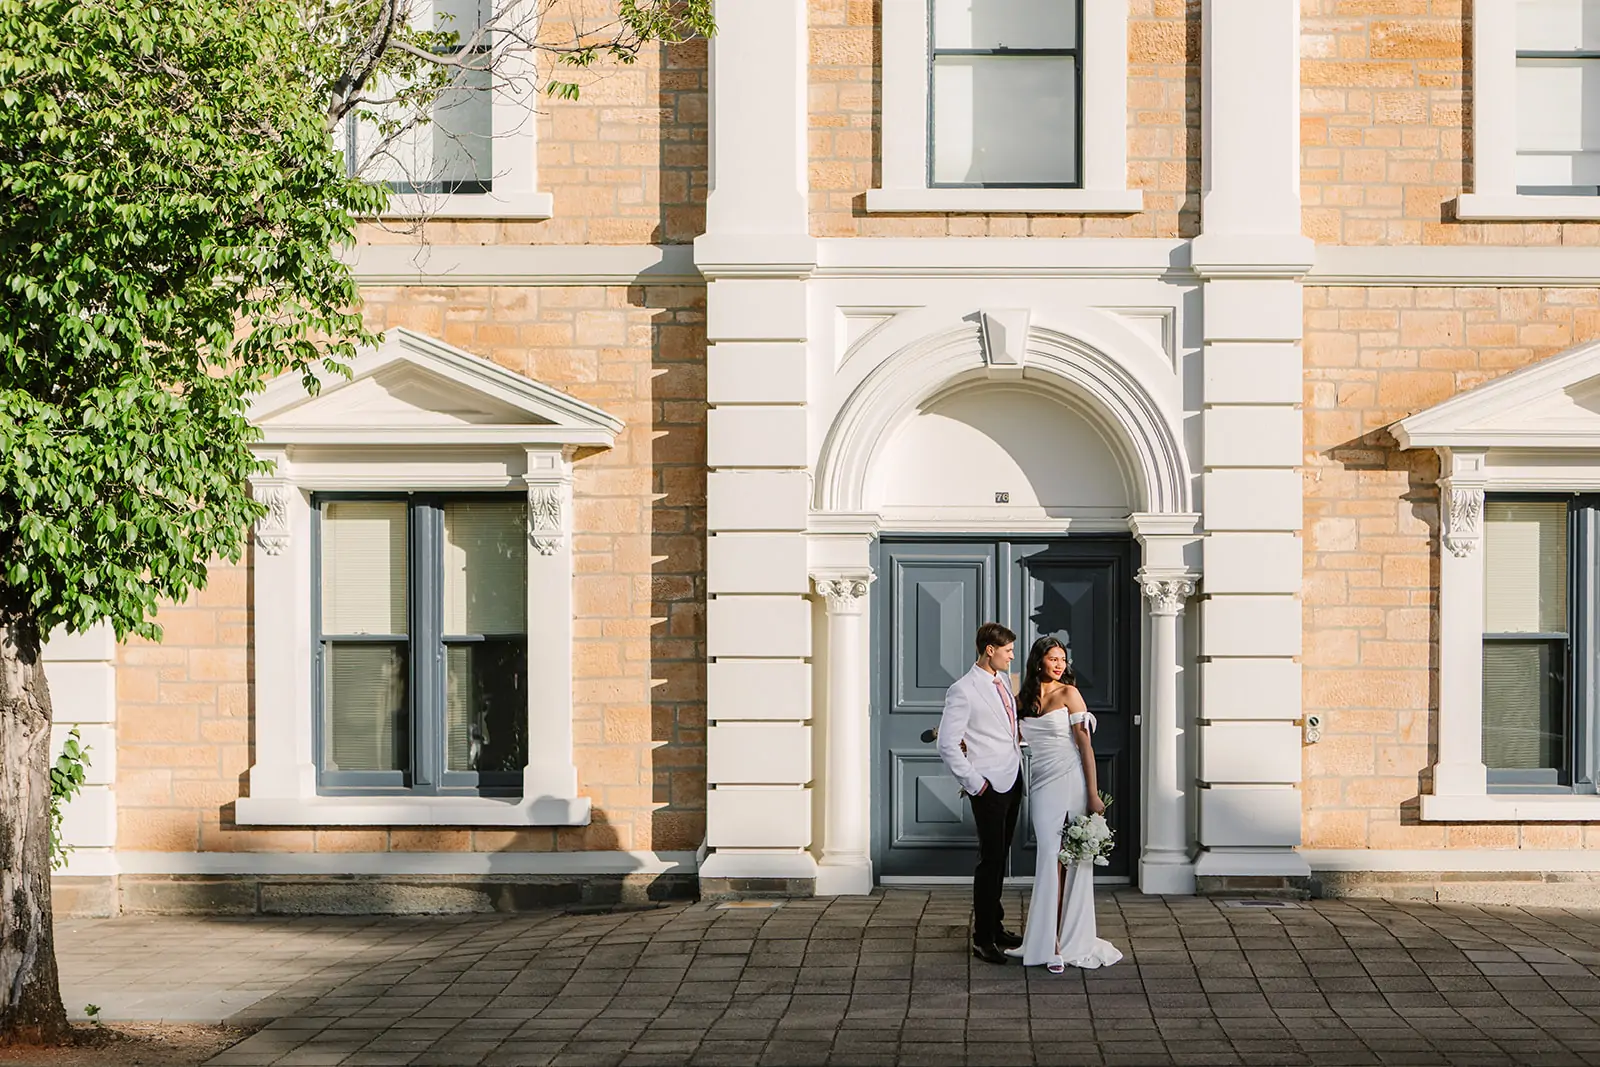 Historic Woodville Town Hall, 1920's glamorous vintage wedding and function venue between Adelaide and the beach.